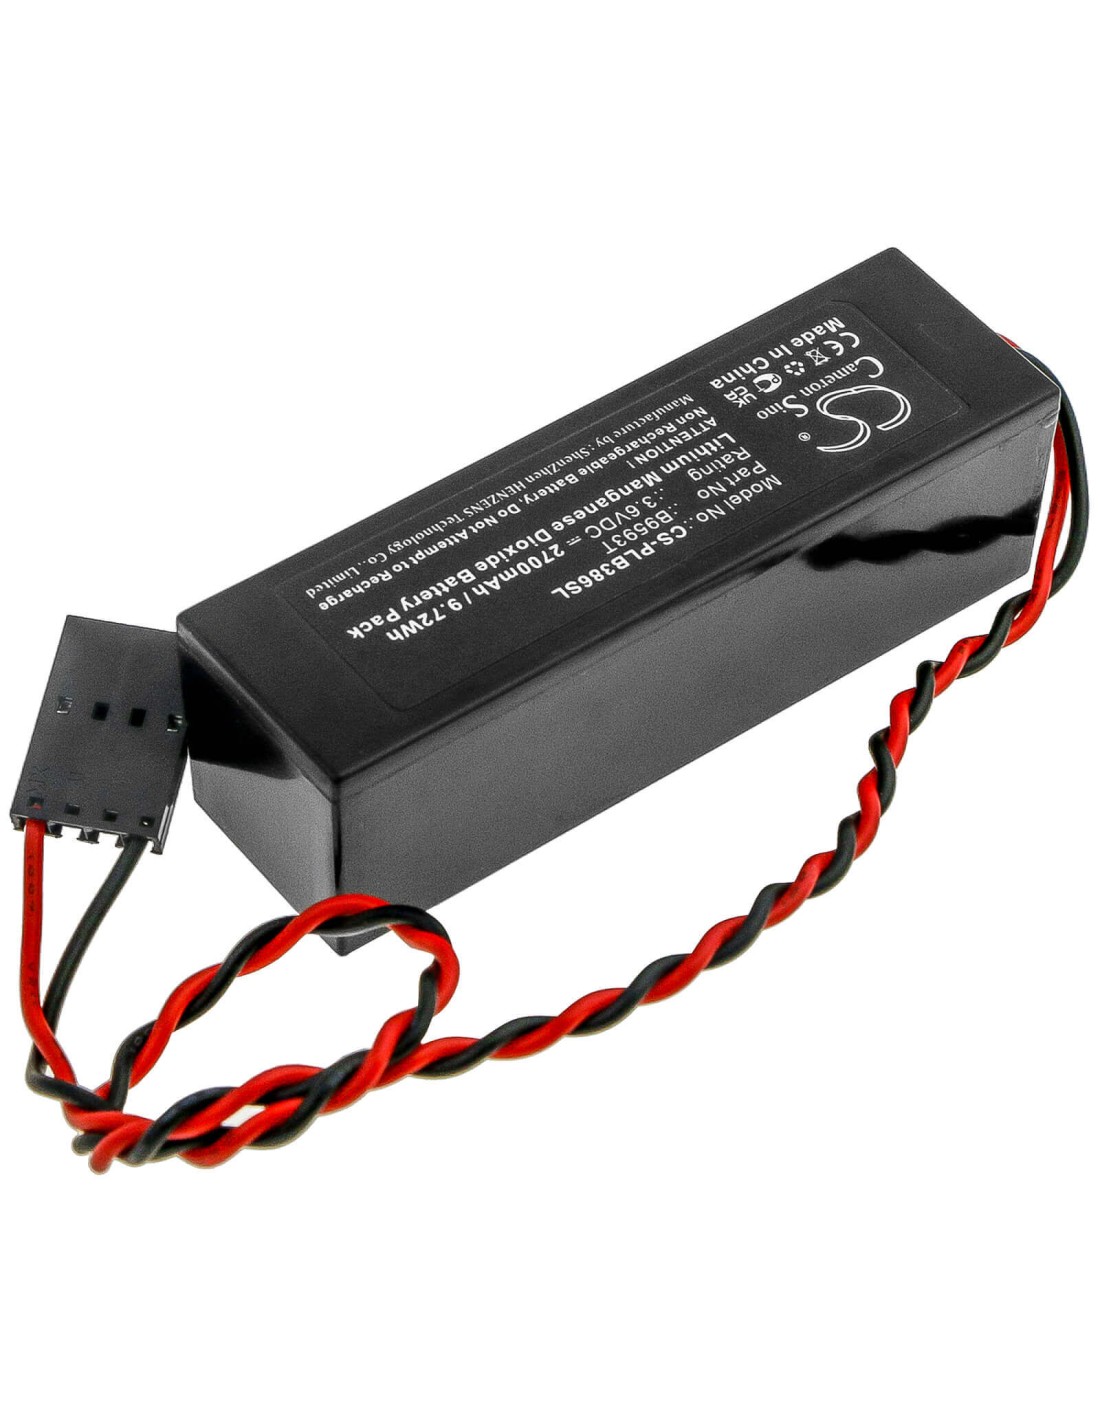 Battery for Micro Express, 286/12sl 3.6V, 2700mAh - 9.72Wh